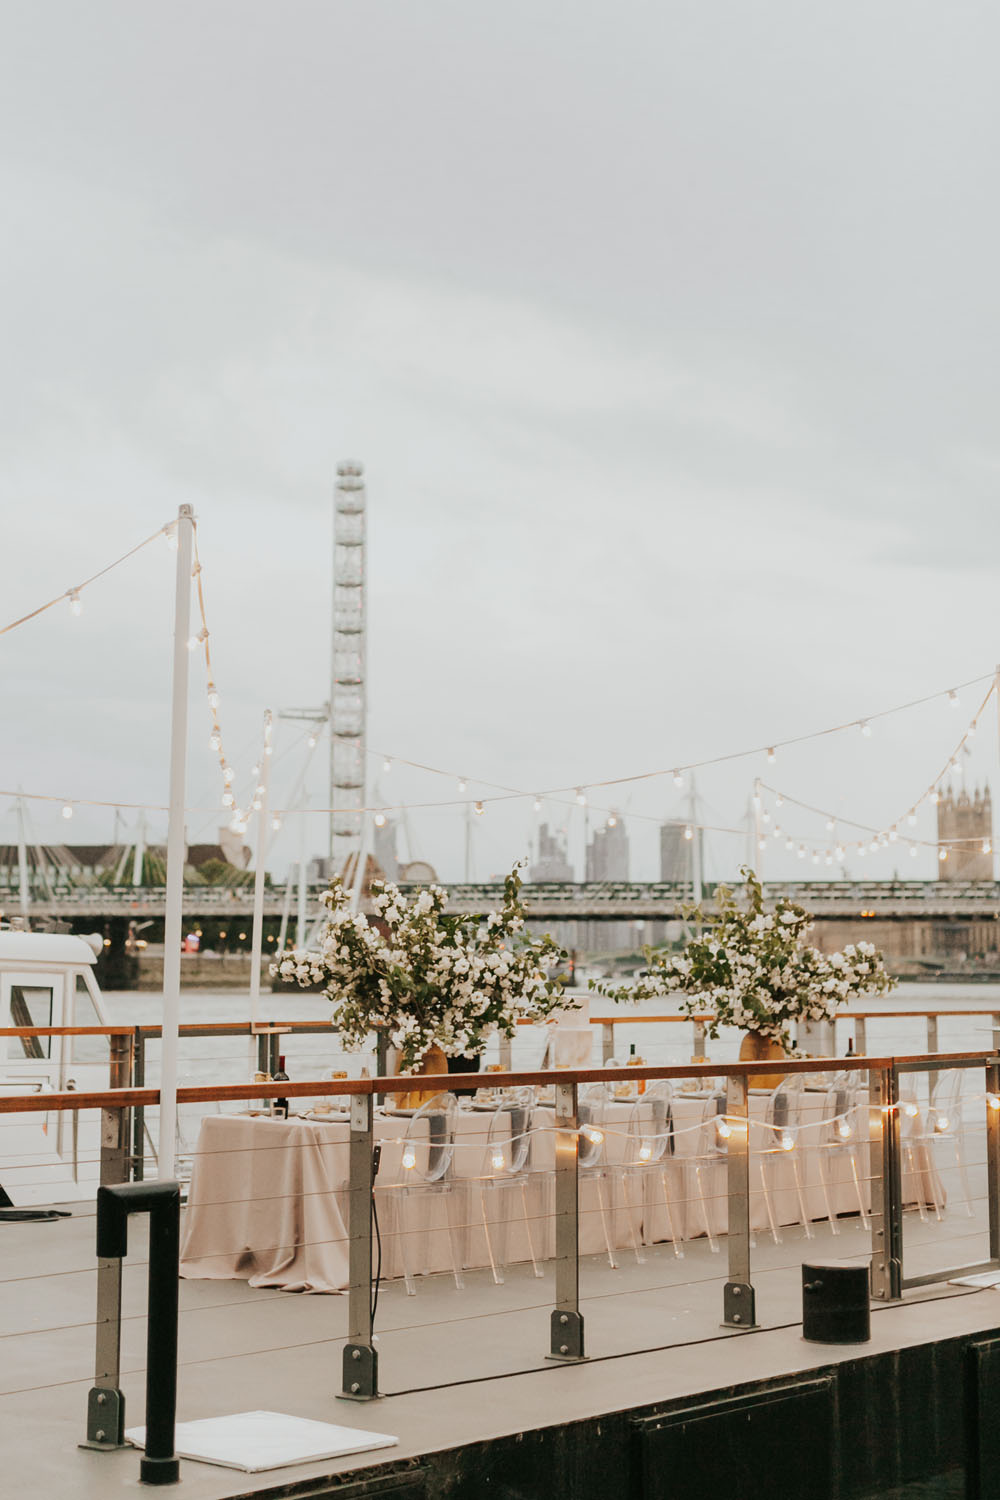 Modern London micro wedding with a boat ride on the Thames